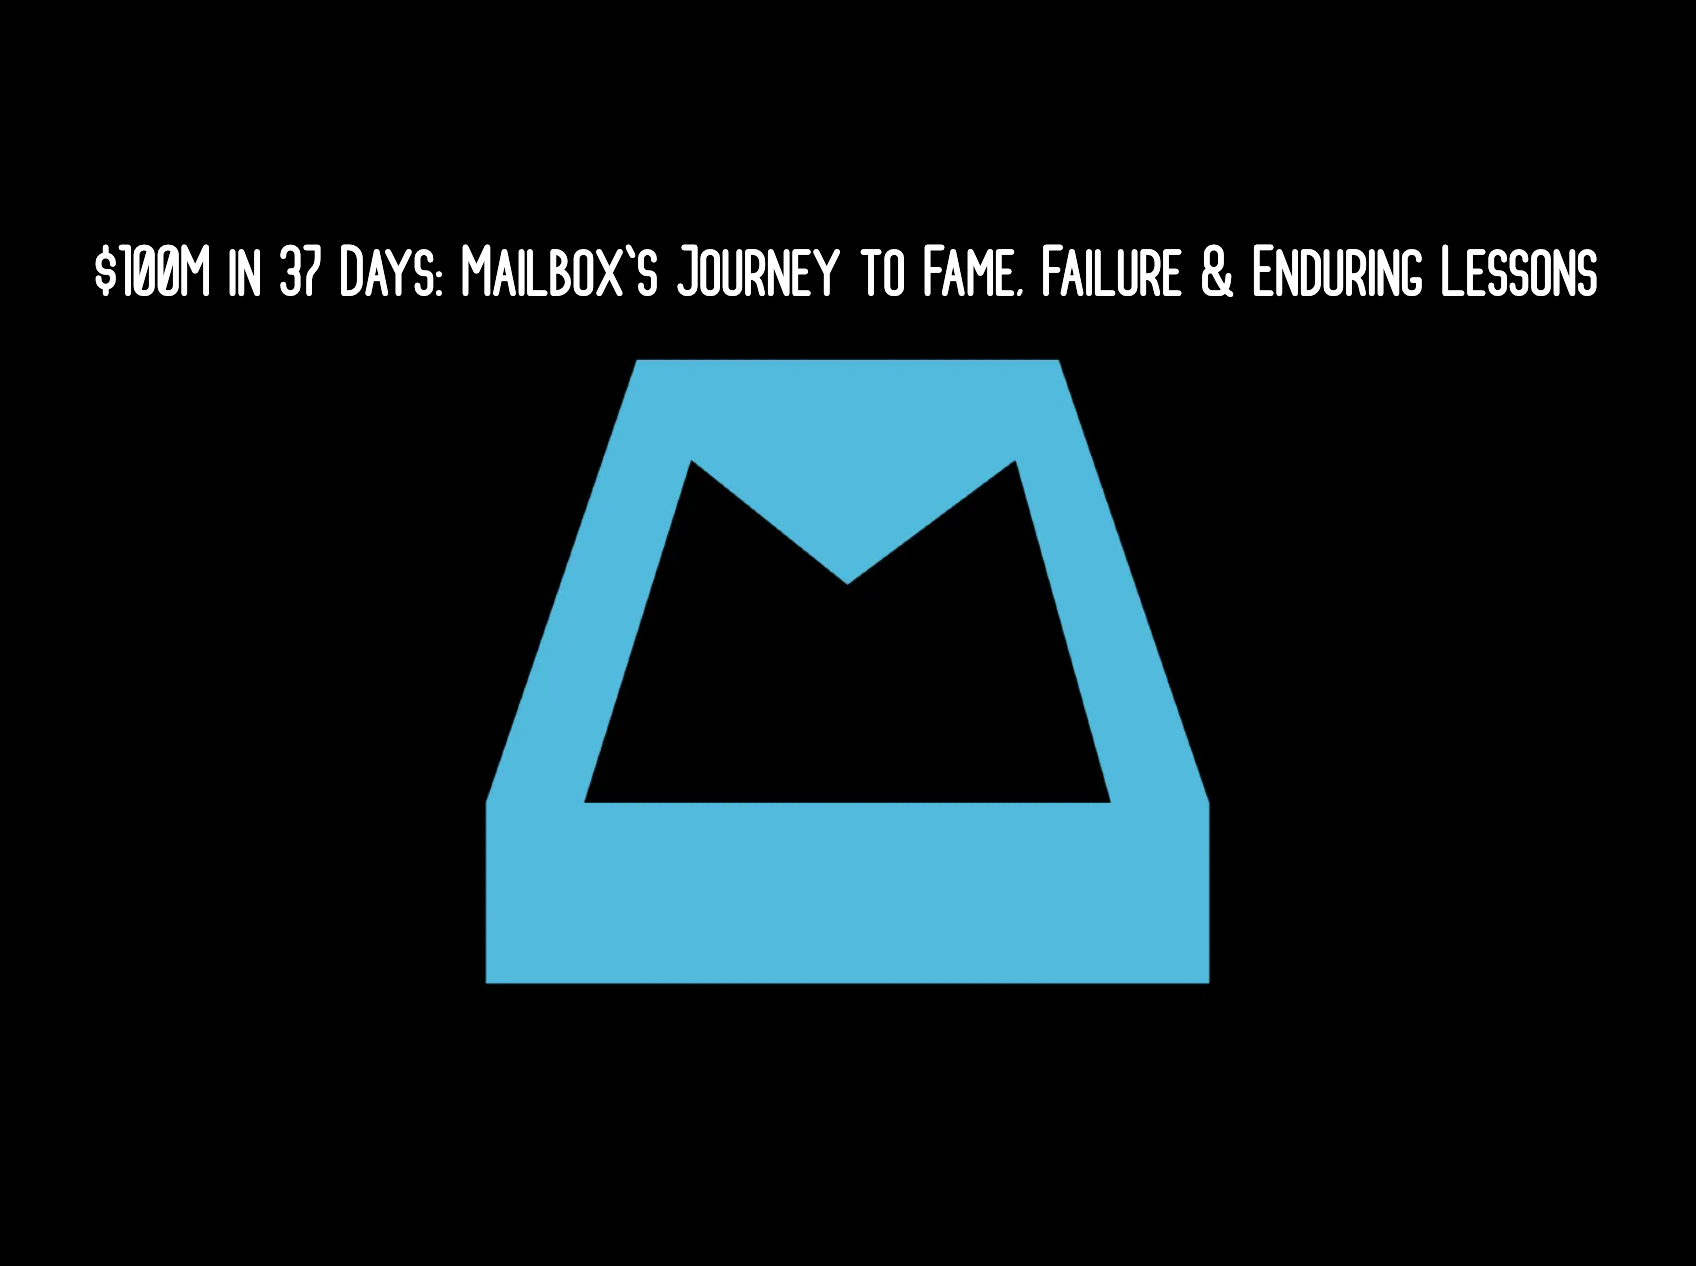 $100M in 37 Days: Mailbox's Journey to Fame, Failure & Enduring Lessons
